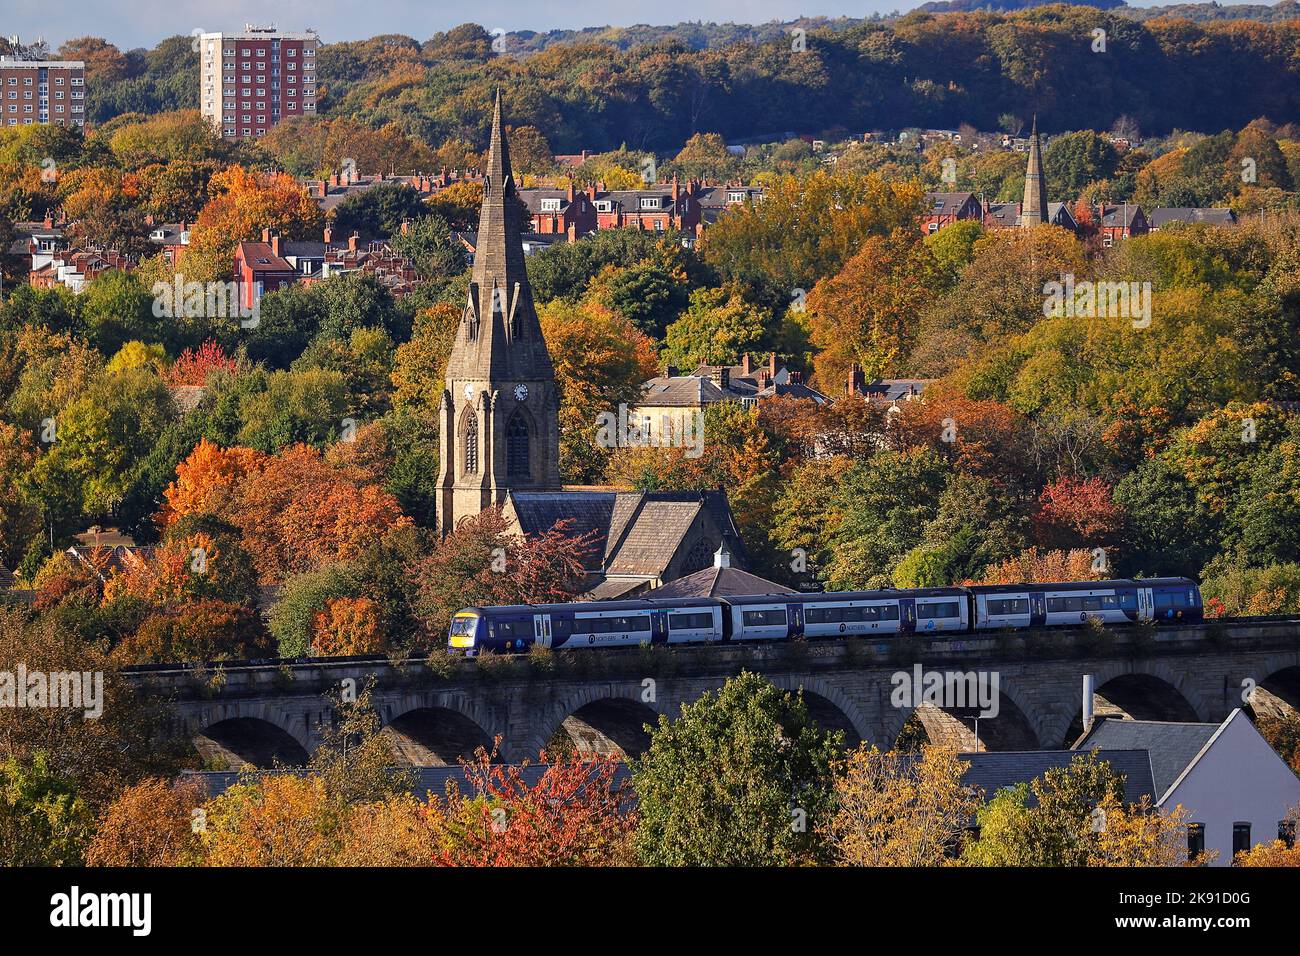 A Northern Rail train travelling across Kirkstall Road Viaduct in Leeds on an Aumtmn day. Stock Photo